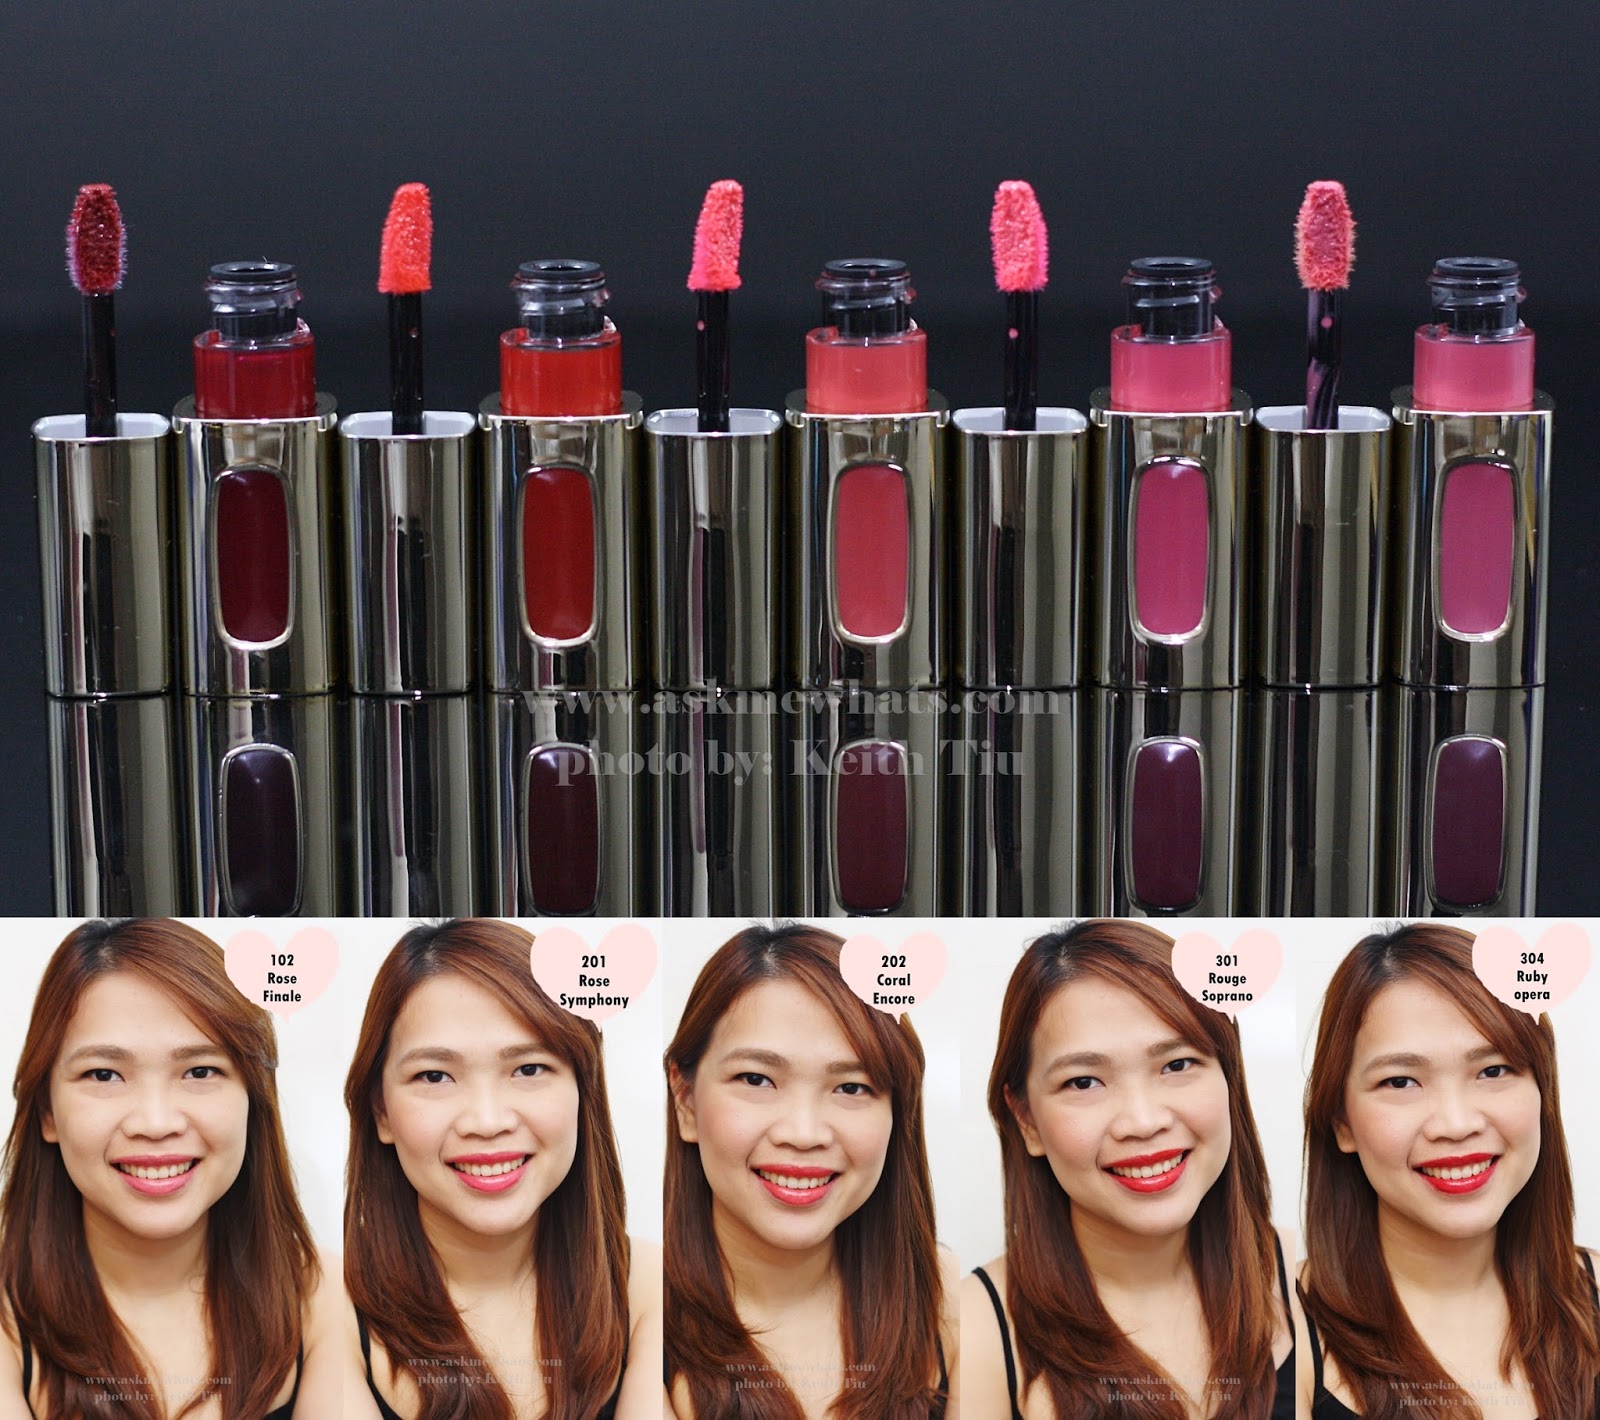 L'Oreal Infallible Mega Gloss Matte Swatches - Really Ree